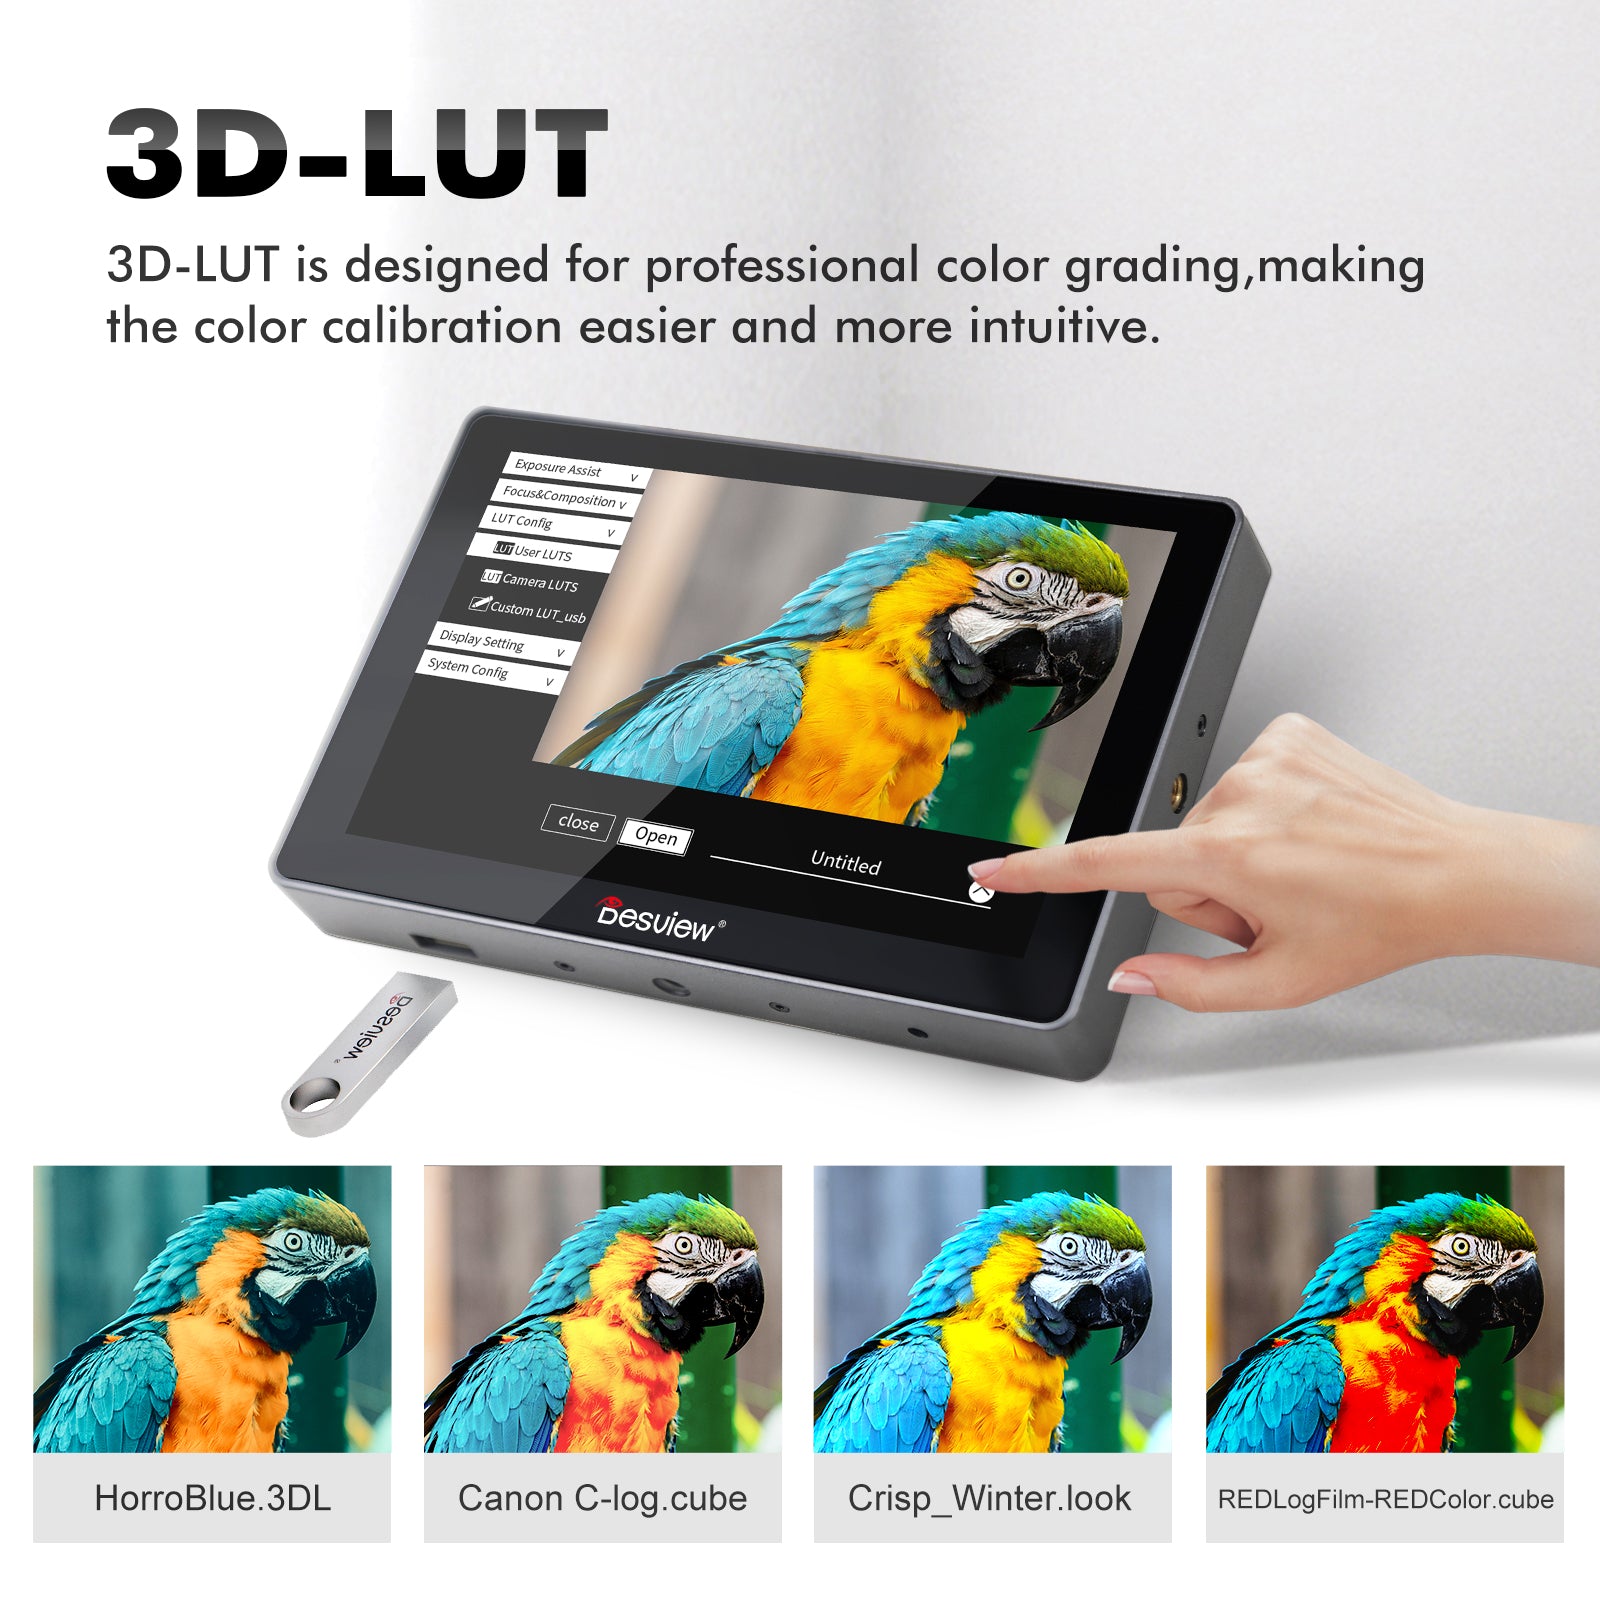 Desview R7II Camera Field Monitor 7 inch 2600nits Touch Screen Full HD IPS 178° View Angle 4K HDMI with 3D Lut Waveform VectorScope Histogram False Color Peaking Focus Full Feature Camera Monitor